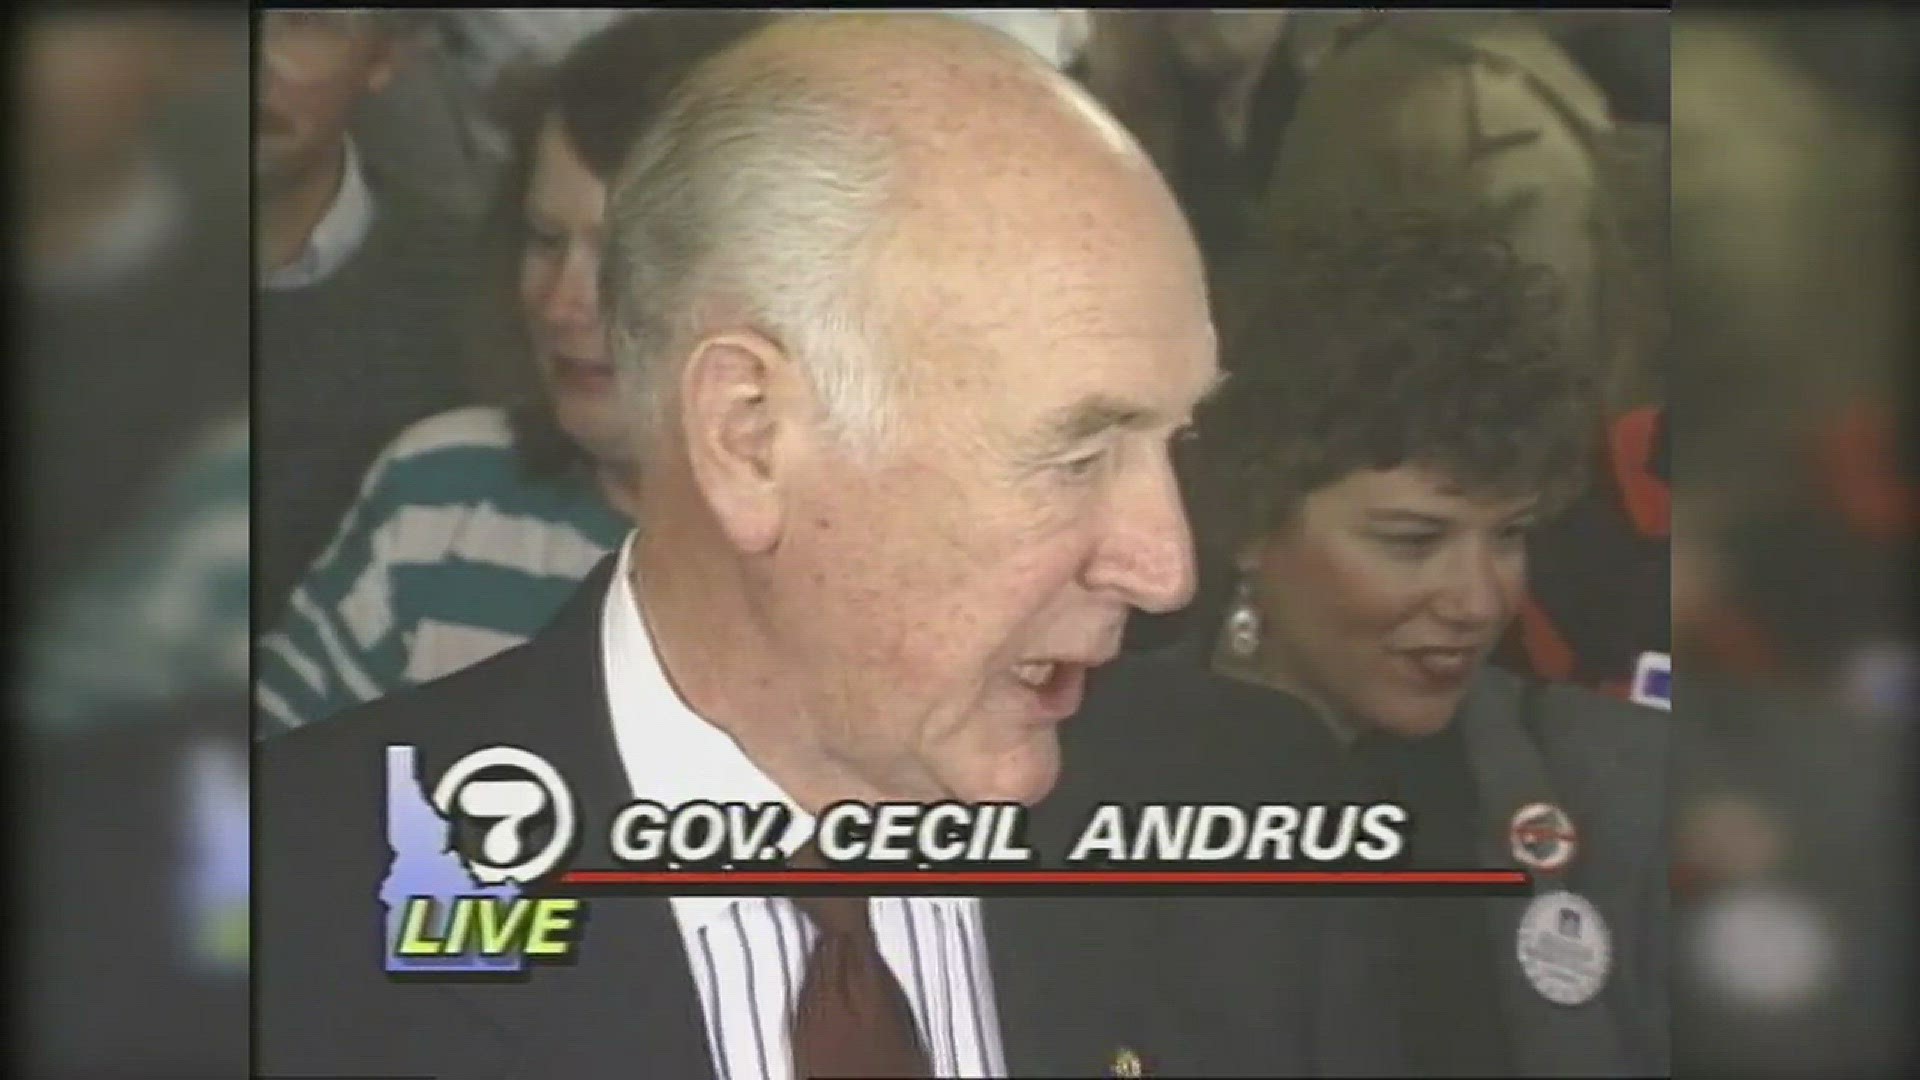 Former governor Cecil Andrus dies at 85